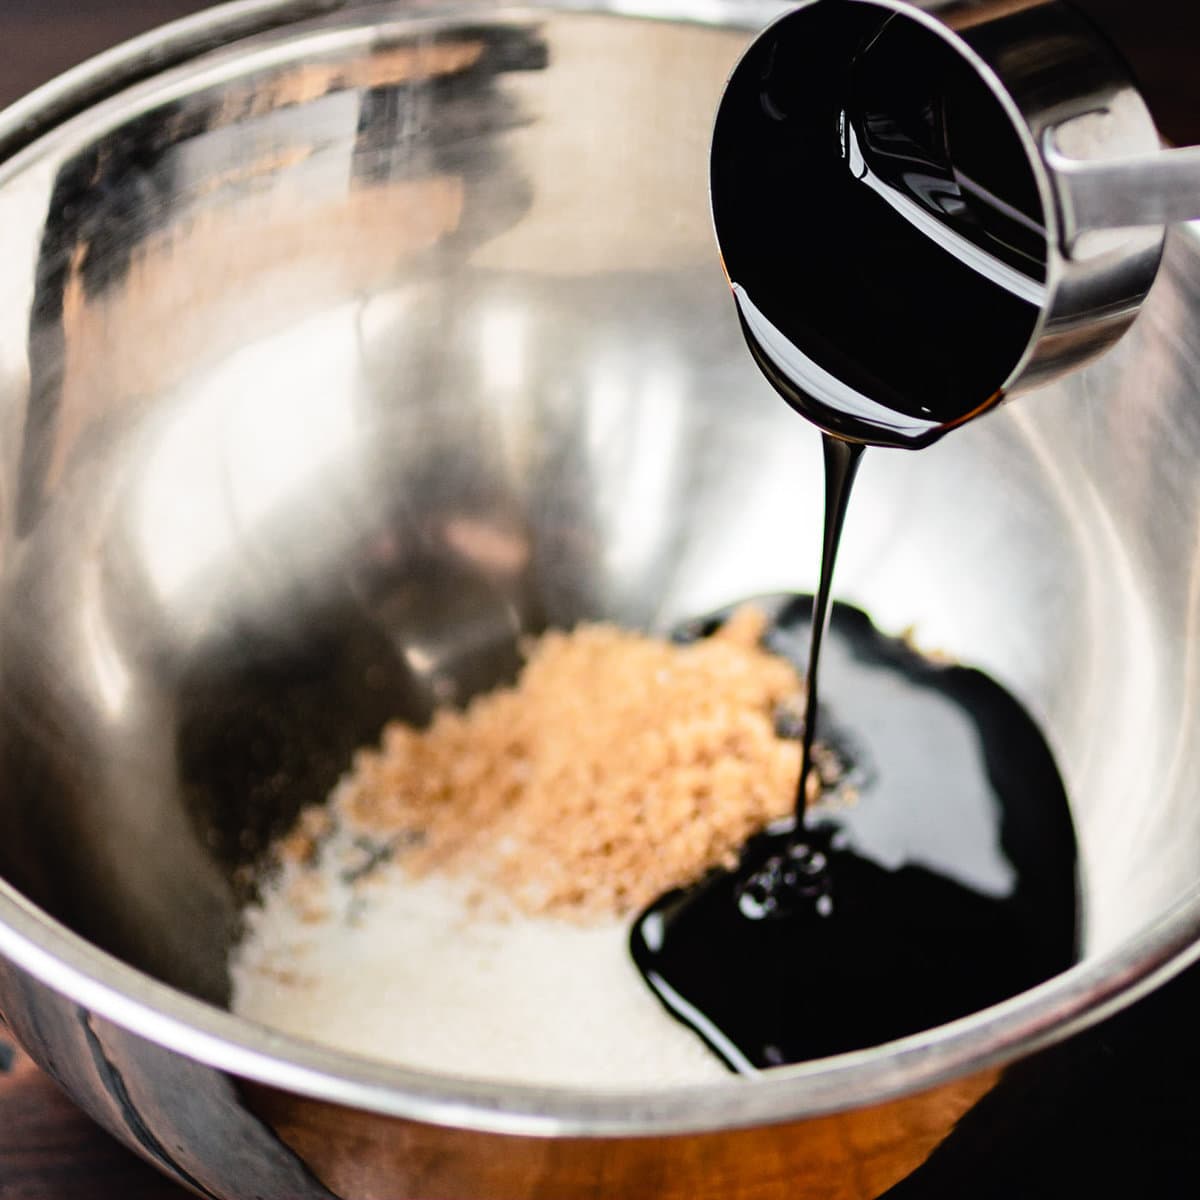 Molasses is being poured into a large mixing bowl with white and brown sugar